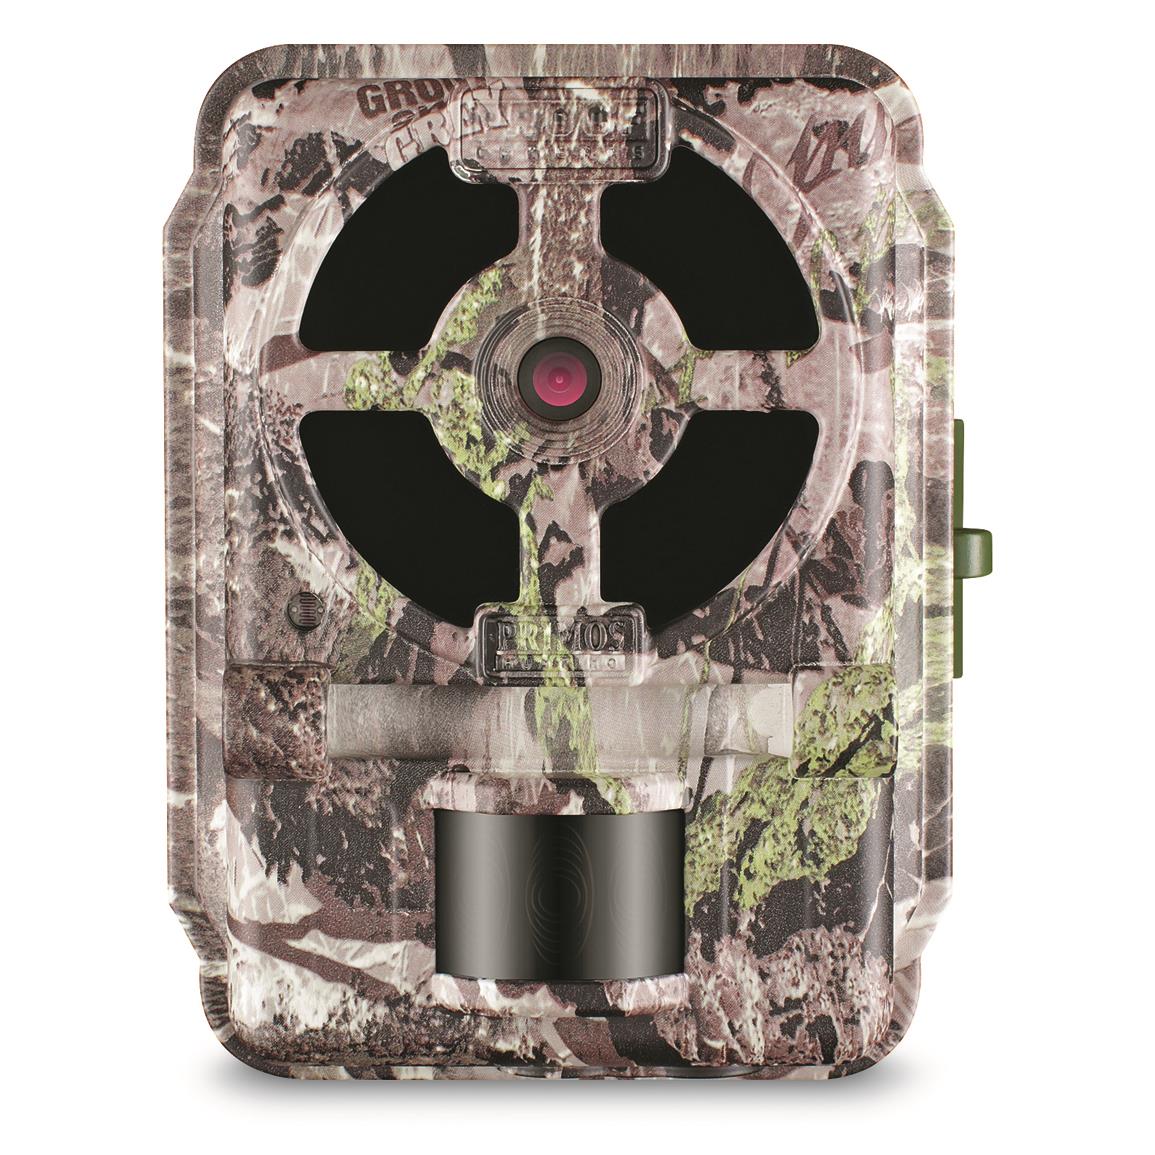 primos-proof-gen-2-02-trail-game-camera-16-mp-699407-game-trail